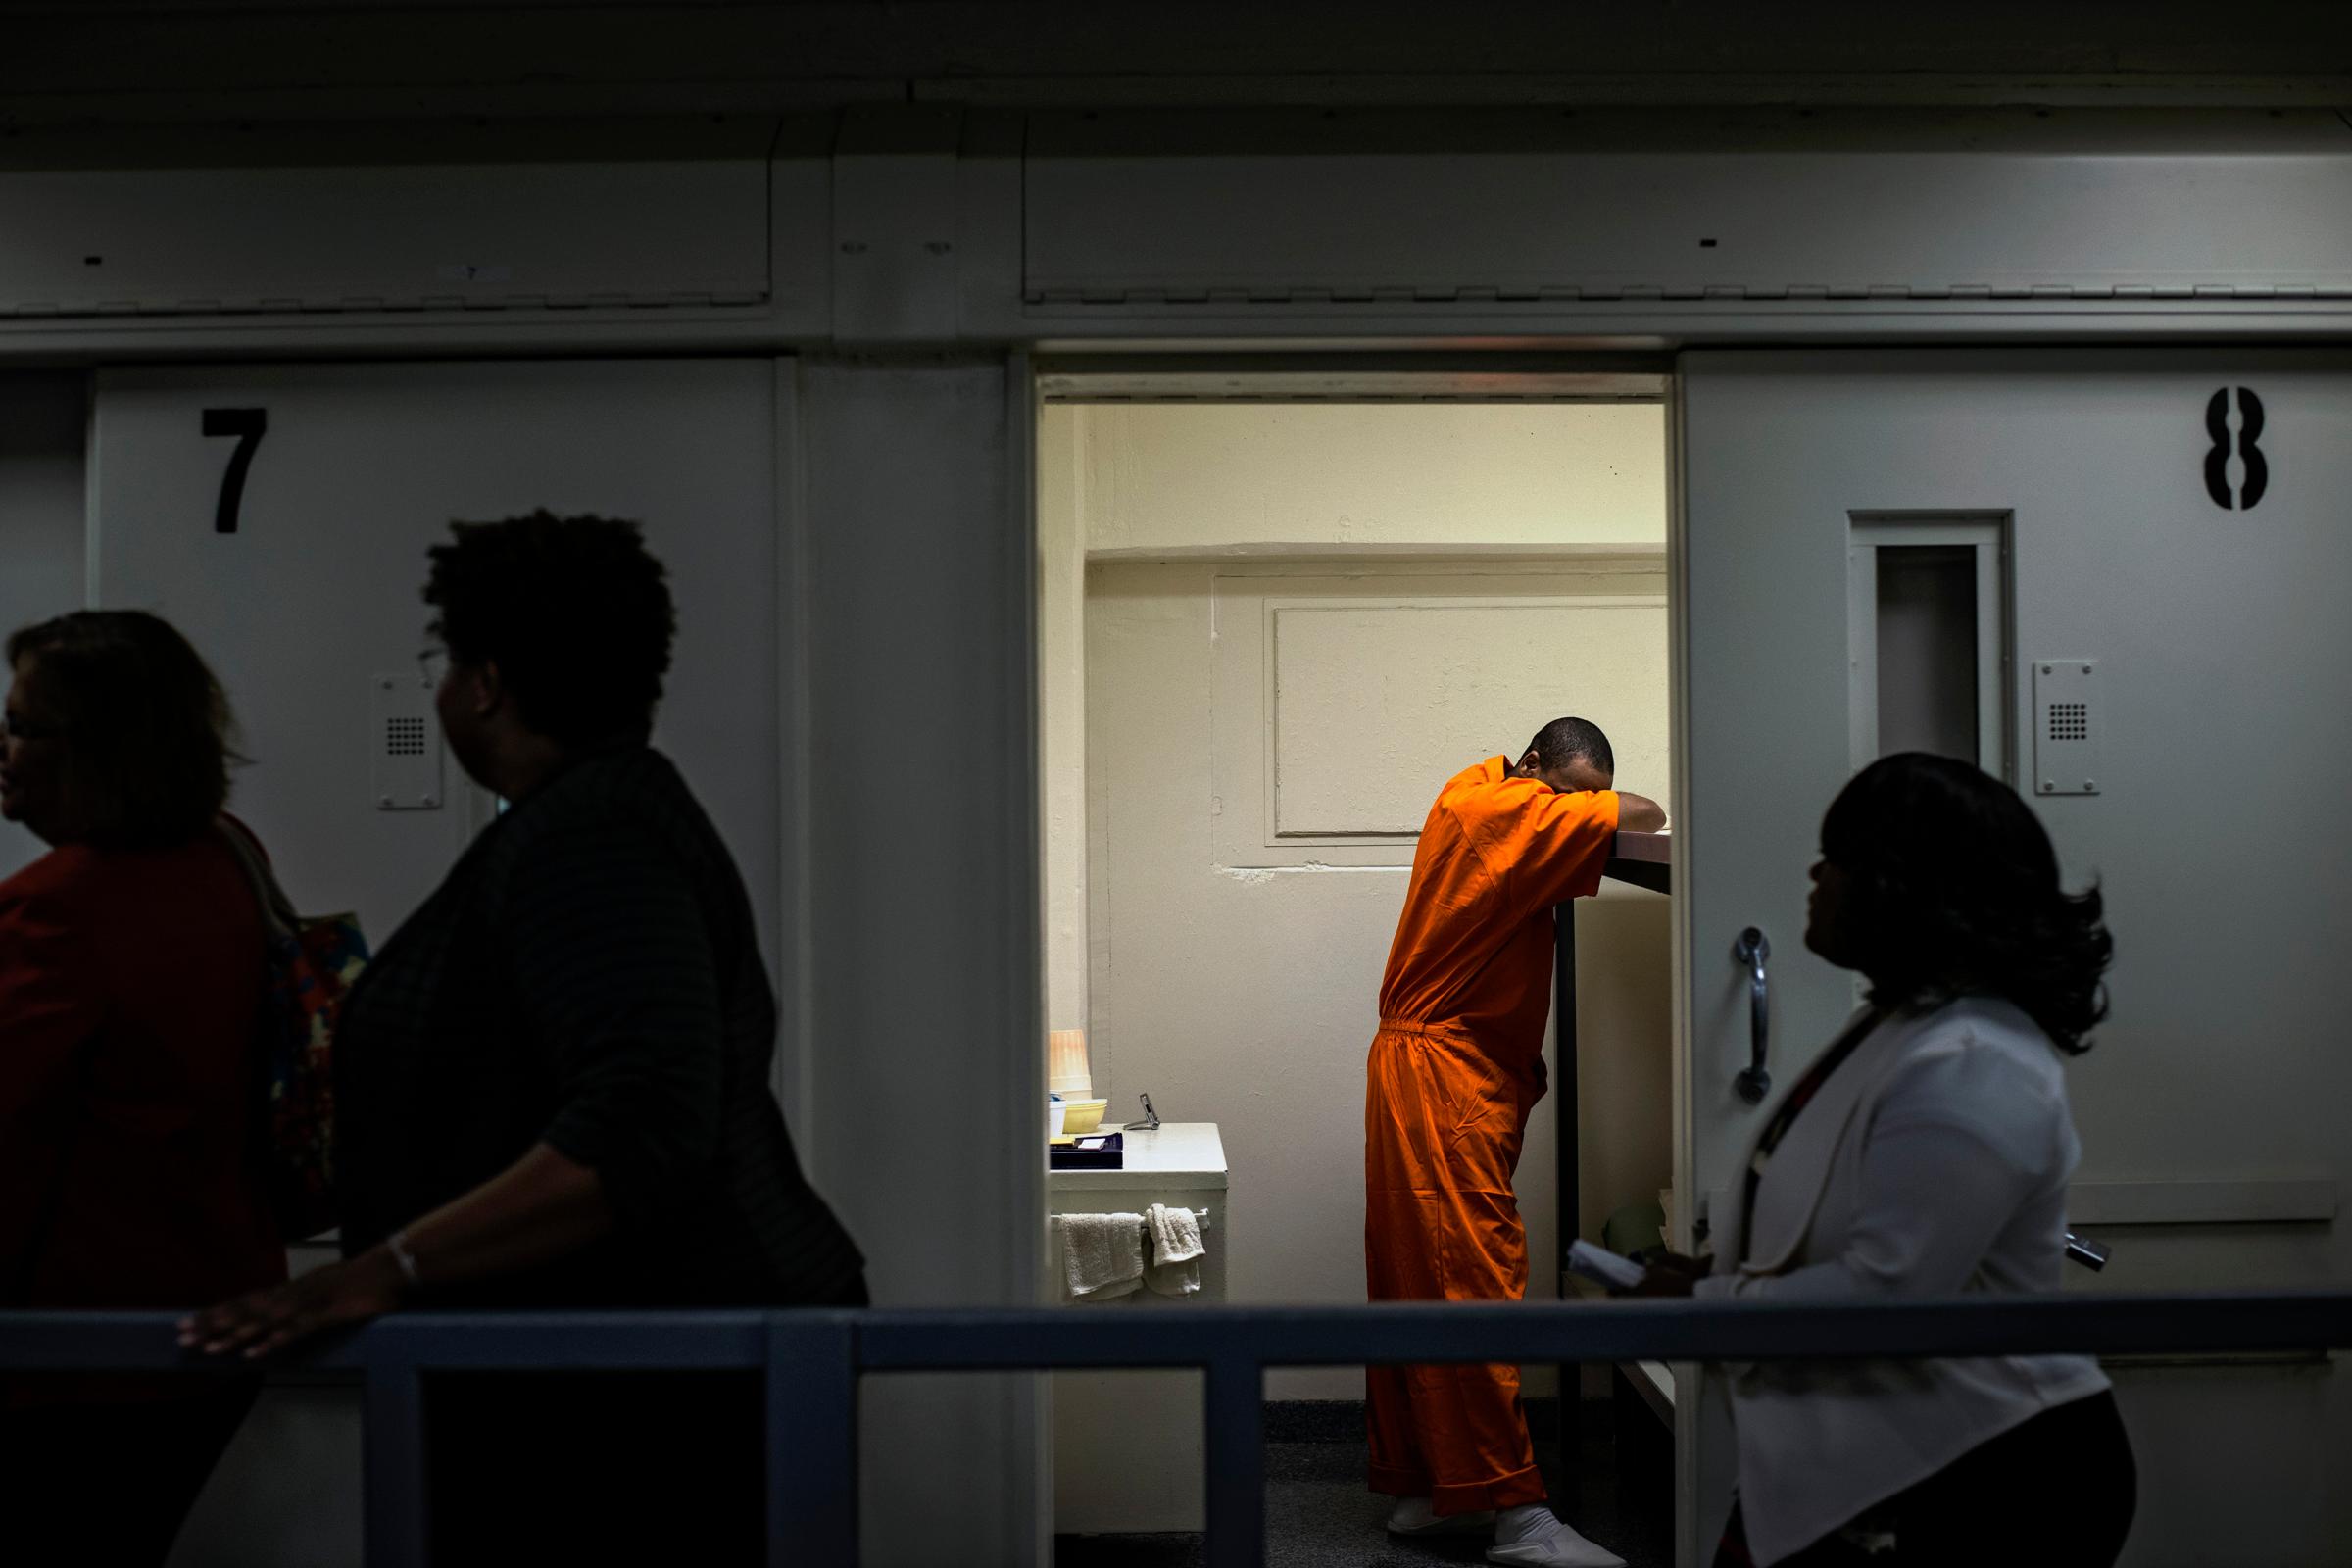 Members of DC Mayor Muriel Bowser's entourage walk past an inmate's cell as she tours DC Central Jail after announcing policy changes to support employment for inmates during and after incarceration in Washington